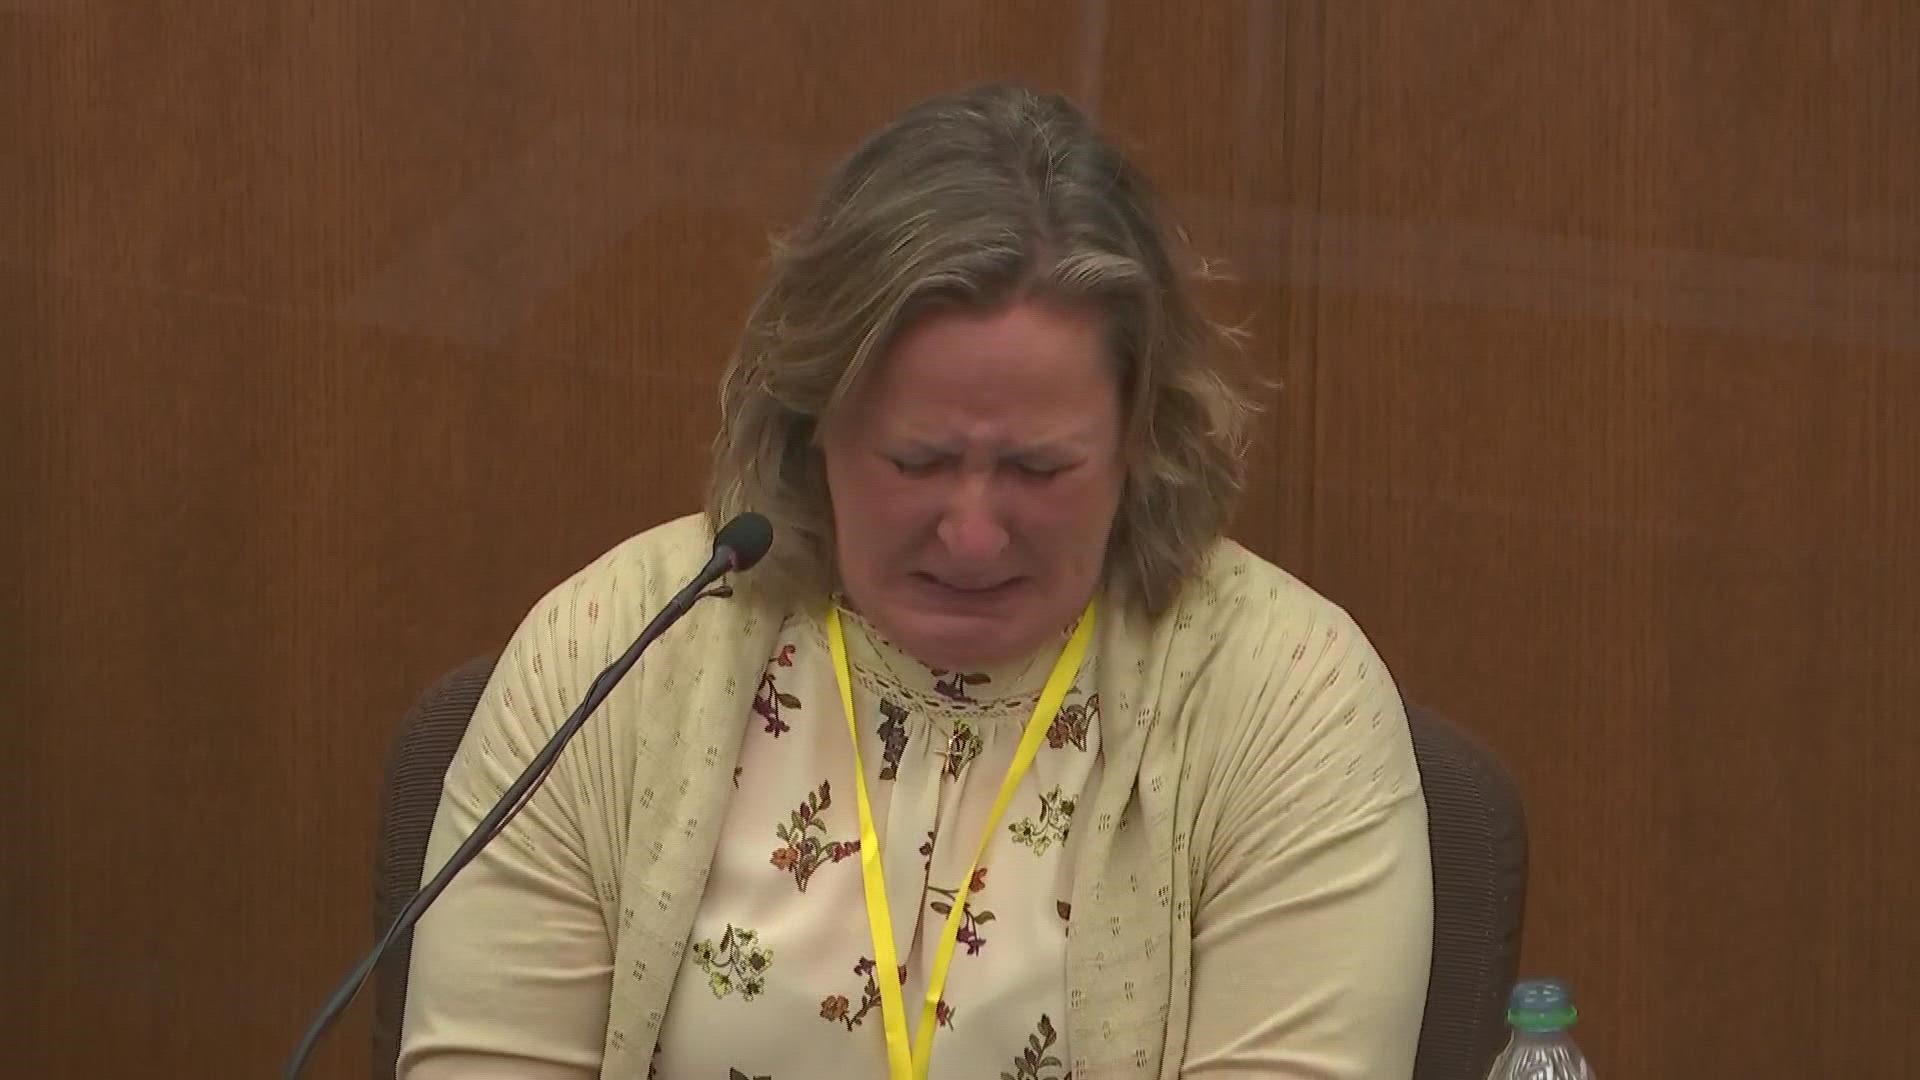 Former officer Kim Potter in tears, says "I'm sorry it happened... I didn't want to hurt anybody."